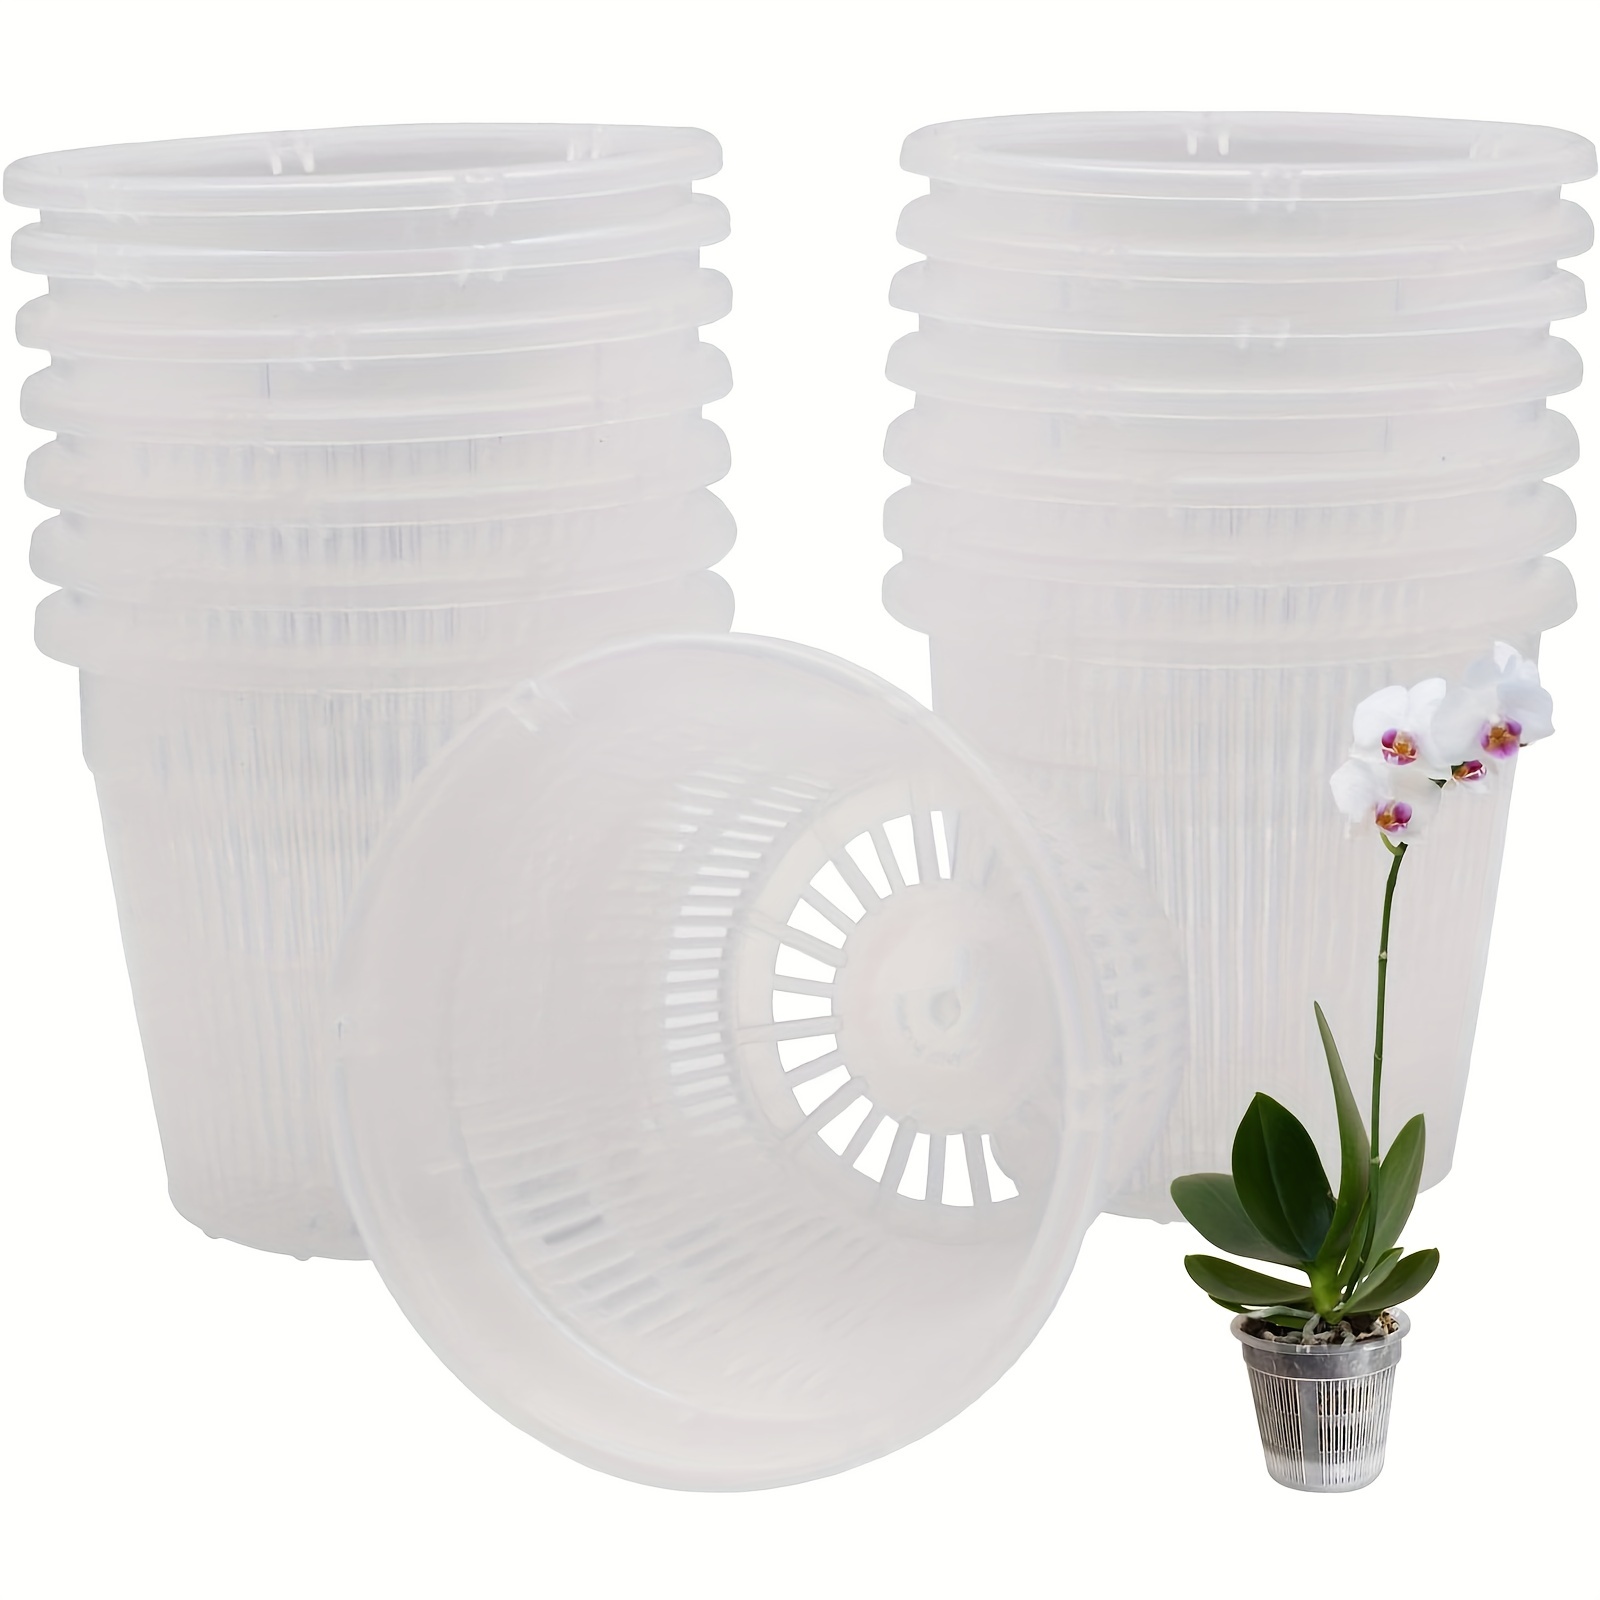 

5pcs, Orchid Pot 4.5 Inch Clear Orchid Pots With Holes Slotted Mesh Net Cups Planting Baskets For Repotting Gardening Flower Plants Pots